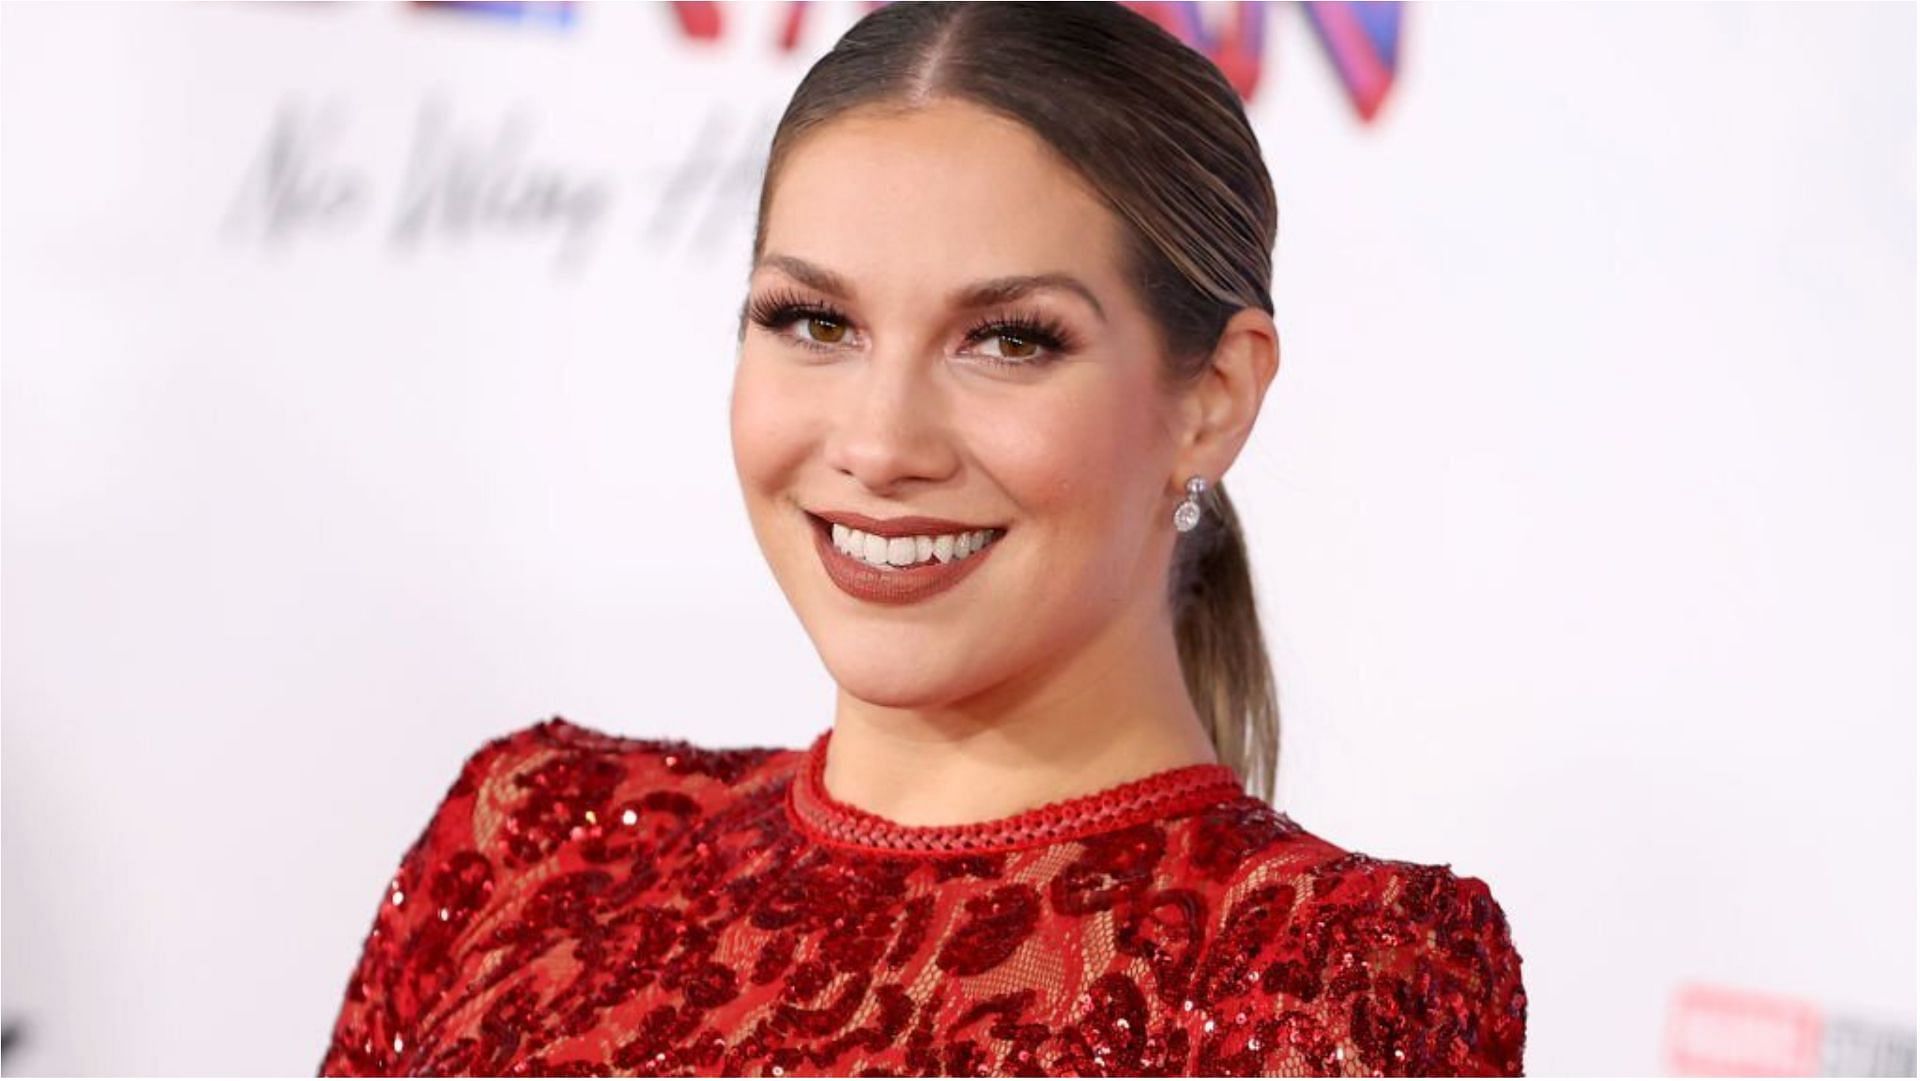 Allison Holker accumulated a lot of wealth from her career in the entertainment industry (Image via Emma McIntyre/Getty Images)